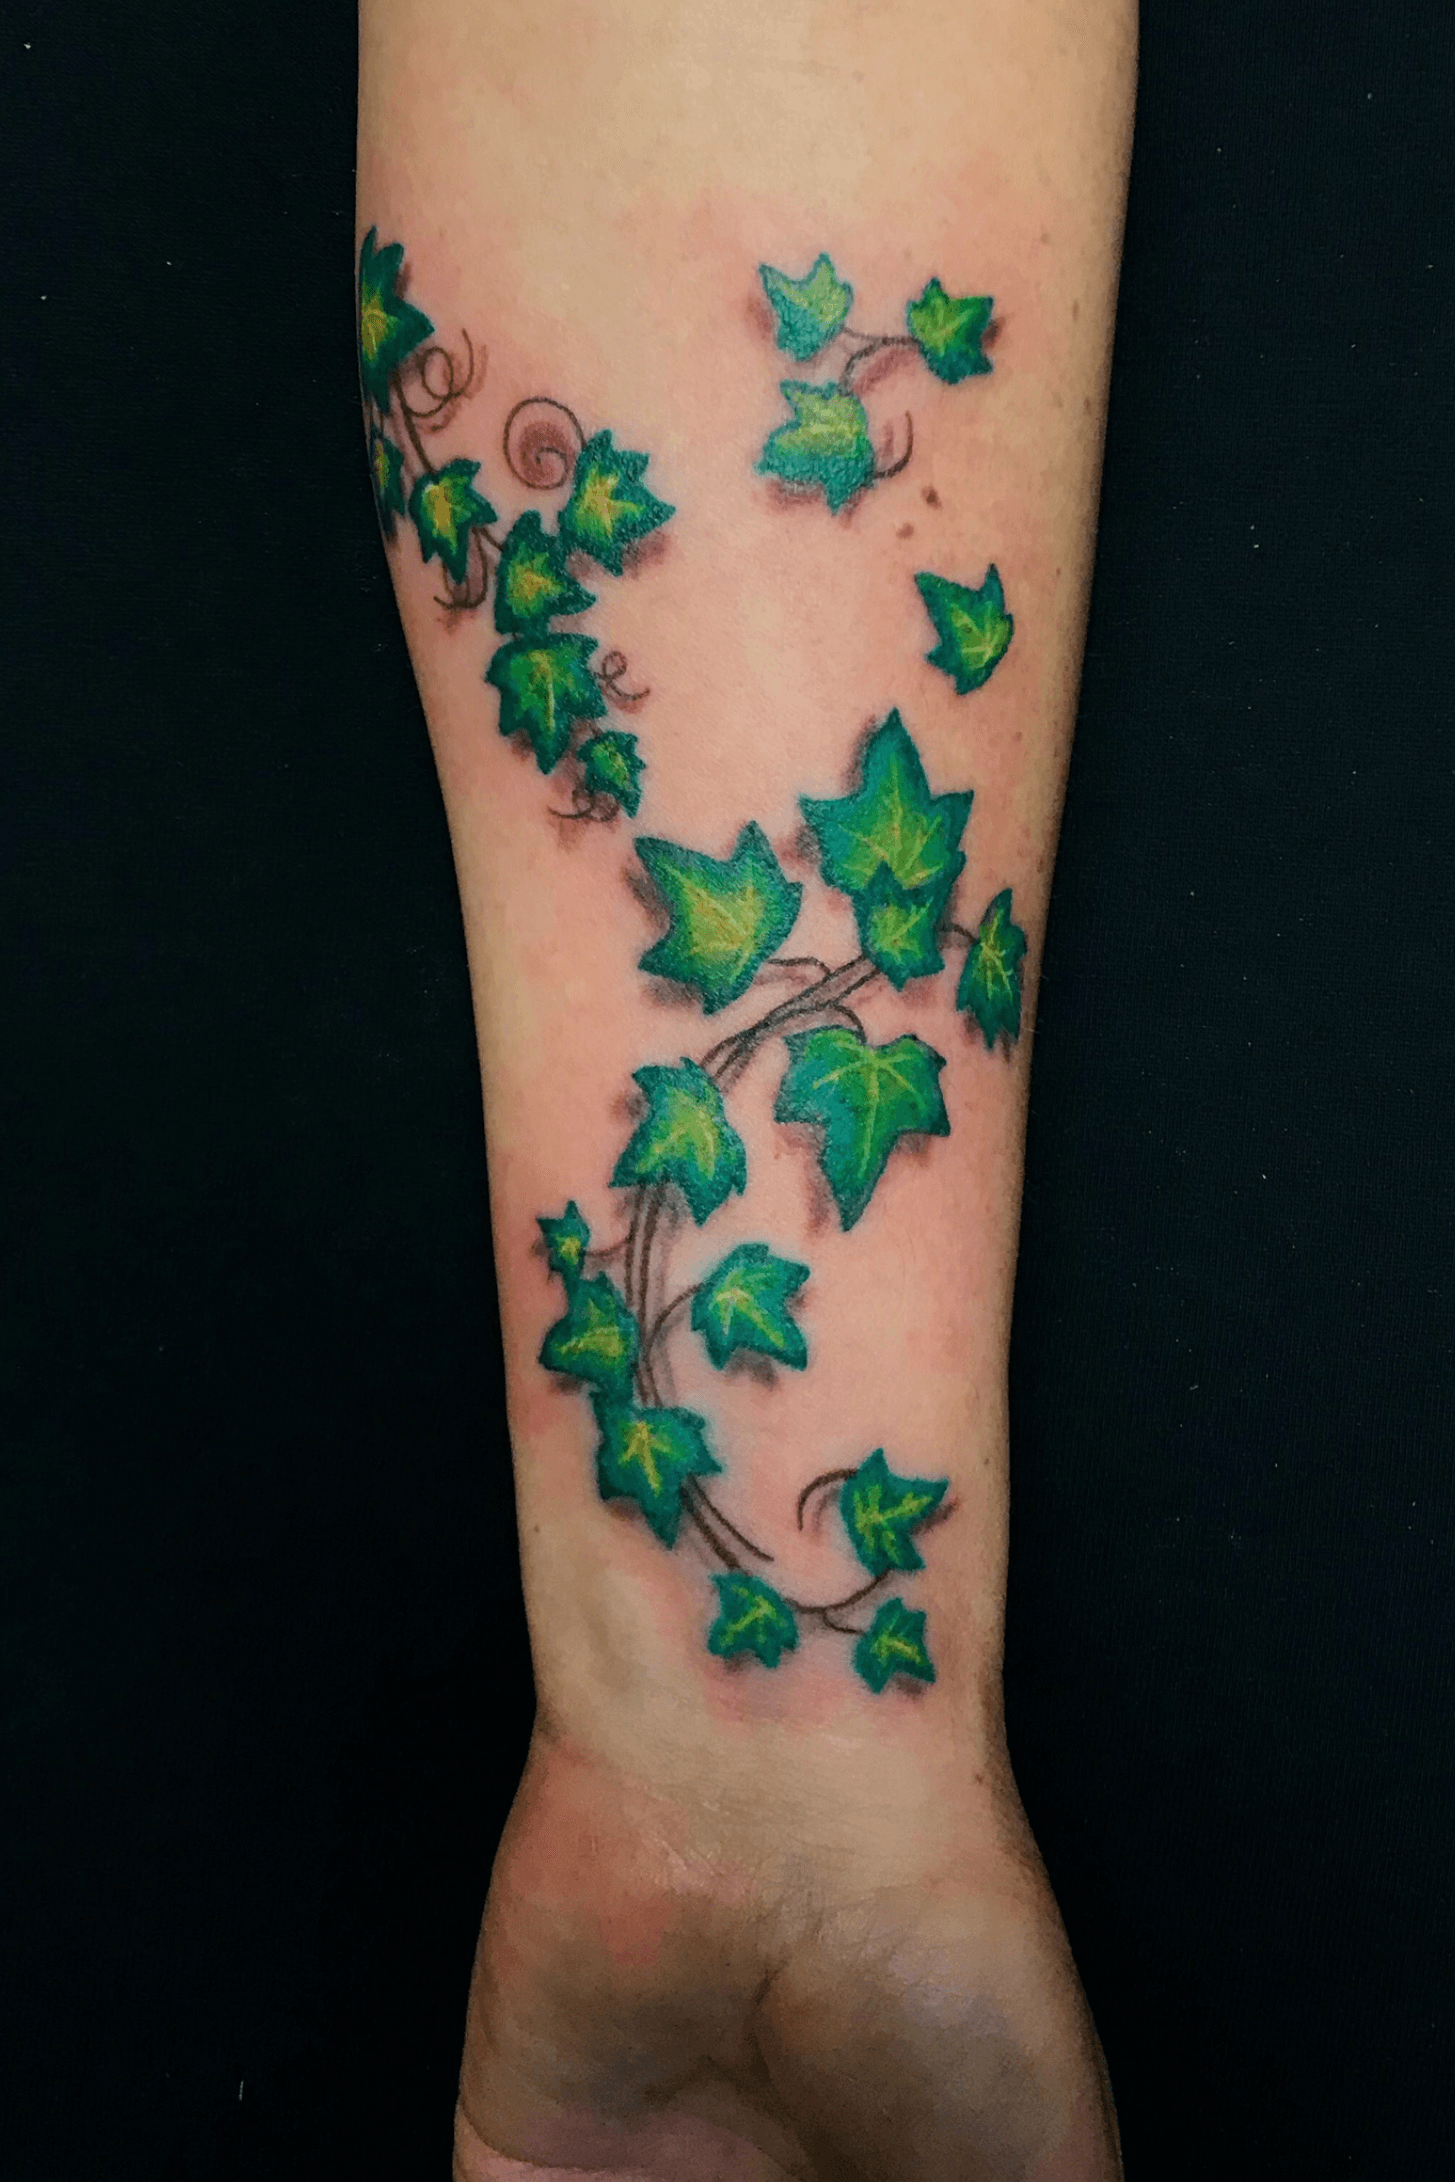 My Poison Oak  Snake Tattoo by Jennifer Lawes at Take Care Tattoo Port  Perry Canada  Snake tattoo Snake tattoo design Insect tattoo